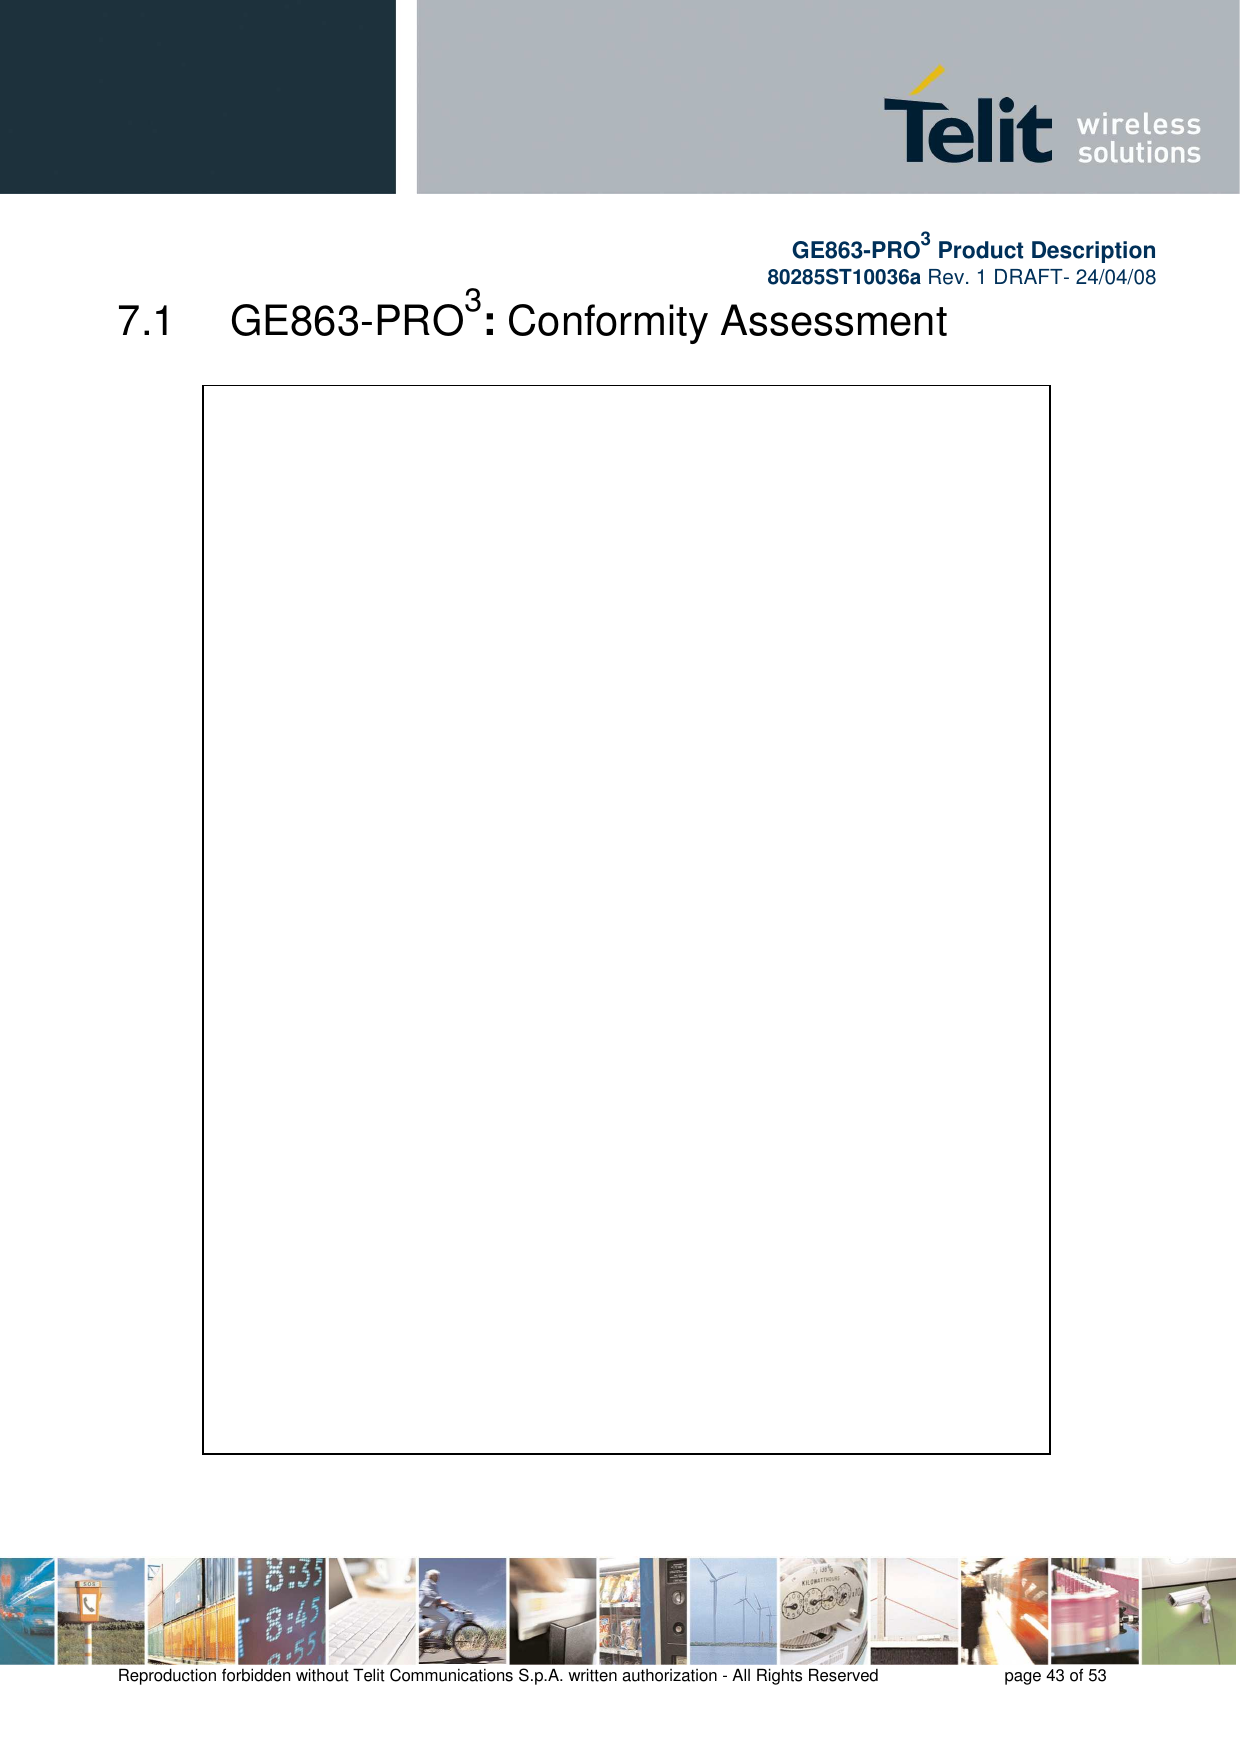       GE863-PRO3 Product Description 80285ST10036a Rev. 1 DRAFT- 24/04/08    Reproduction forbidden without Telit Communications S.p.A. written authorization - All Rights Reserved    page 43 of 53  7.1   GE863-PRO3: Conformity Assessment    